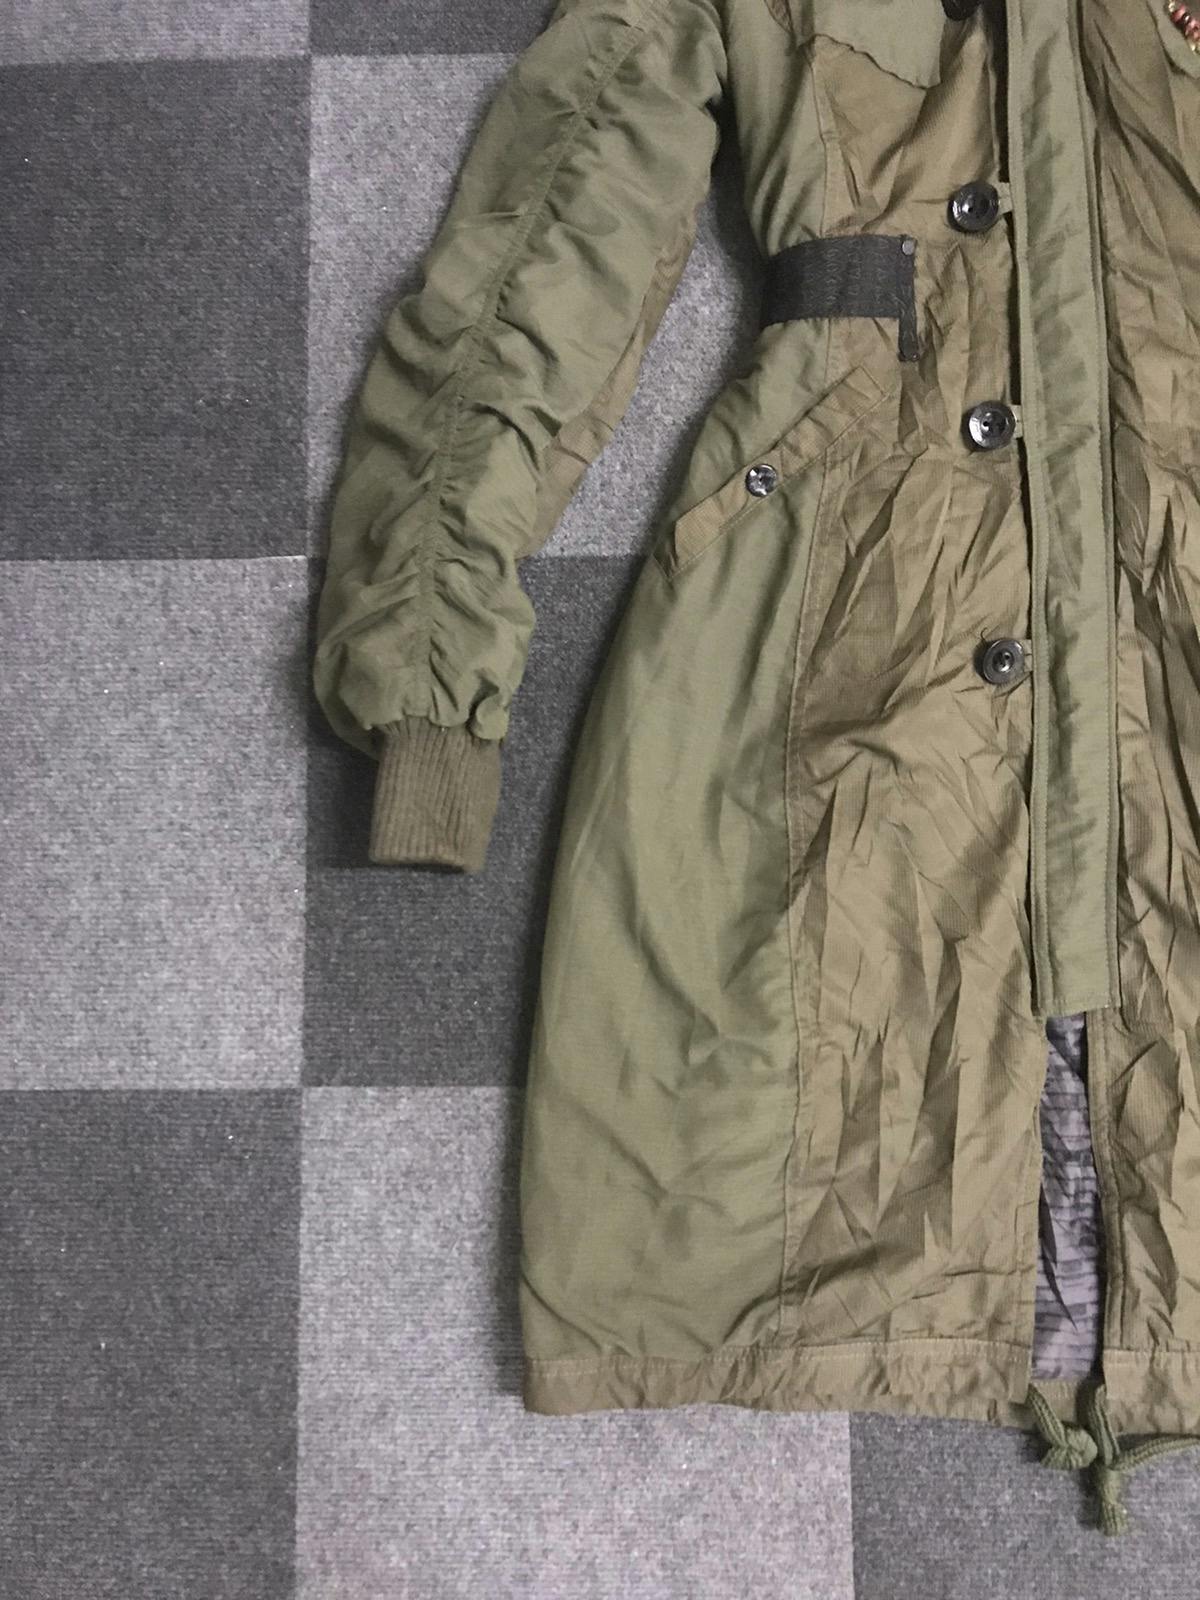 PAR7 DIESEL Italy Very Rare Archival Two Tone Military Parka - 5